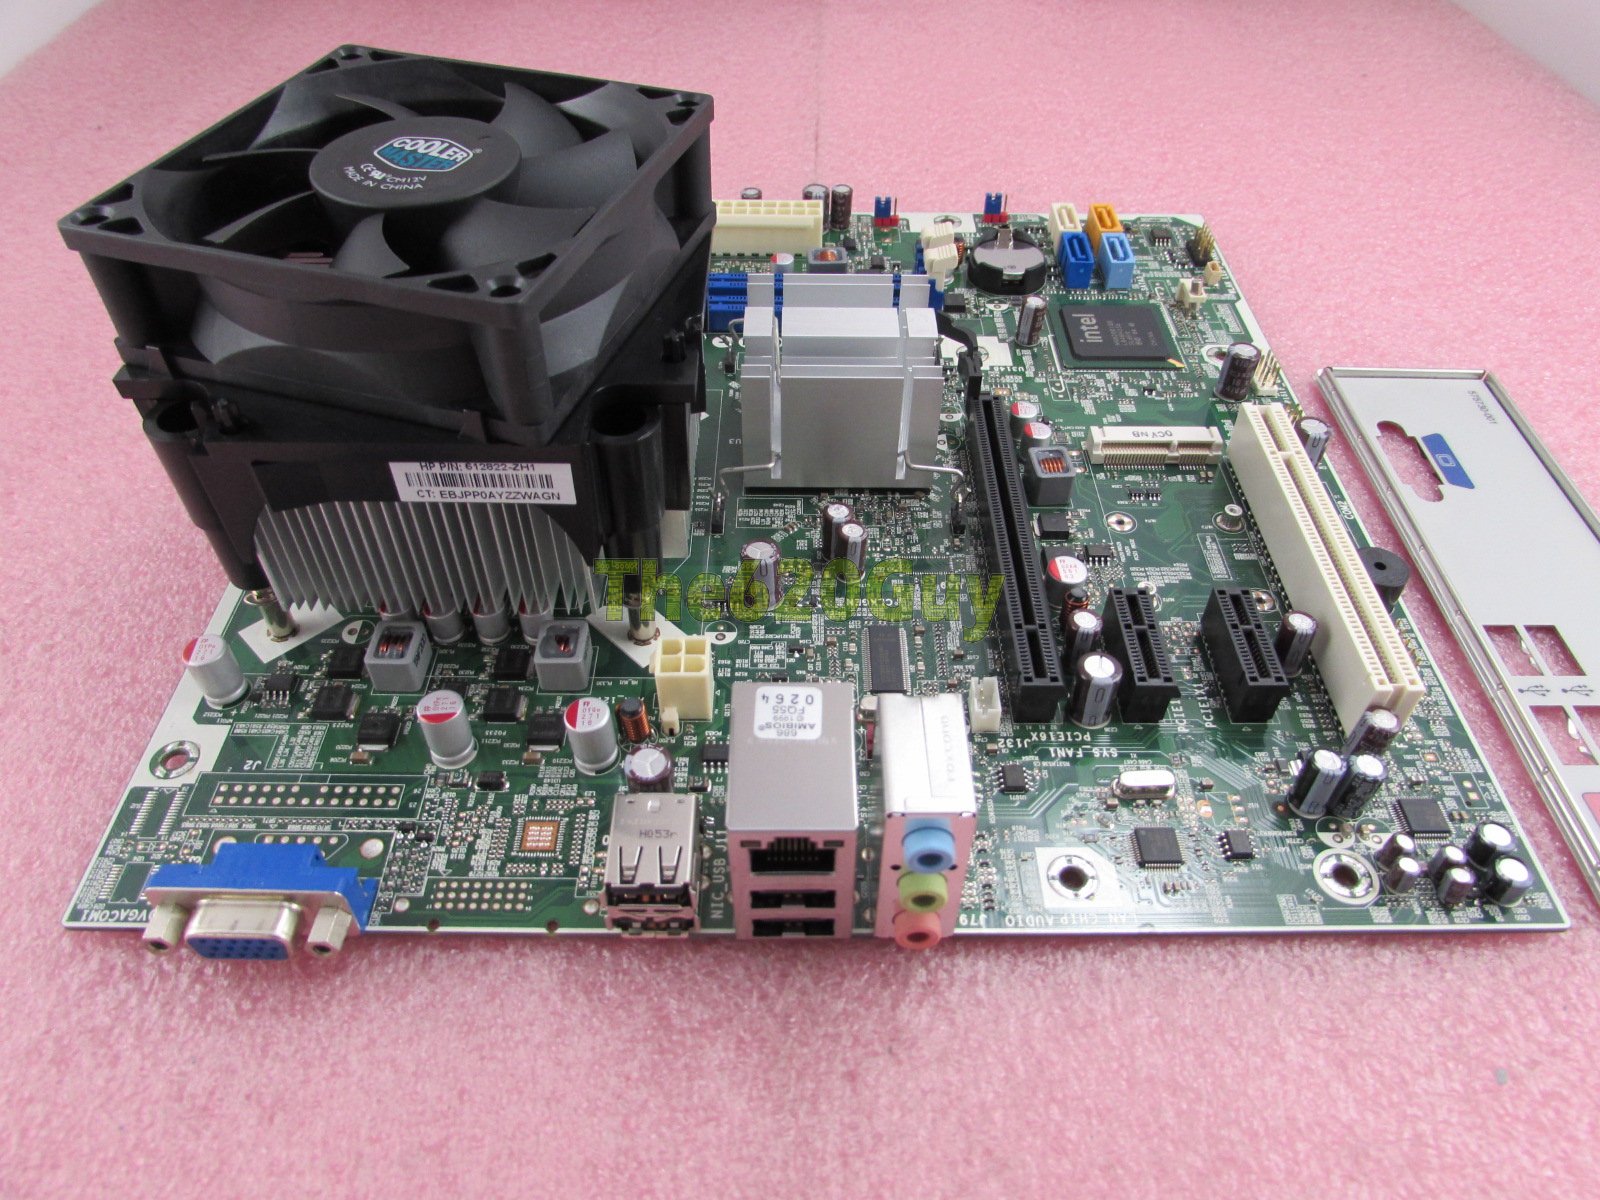 integrated intel gma x4500 video chipset